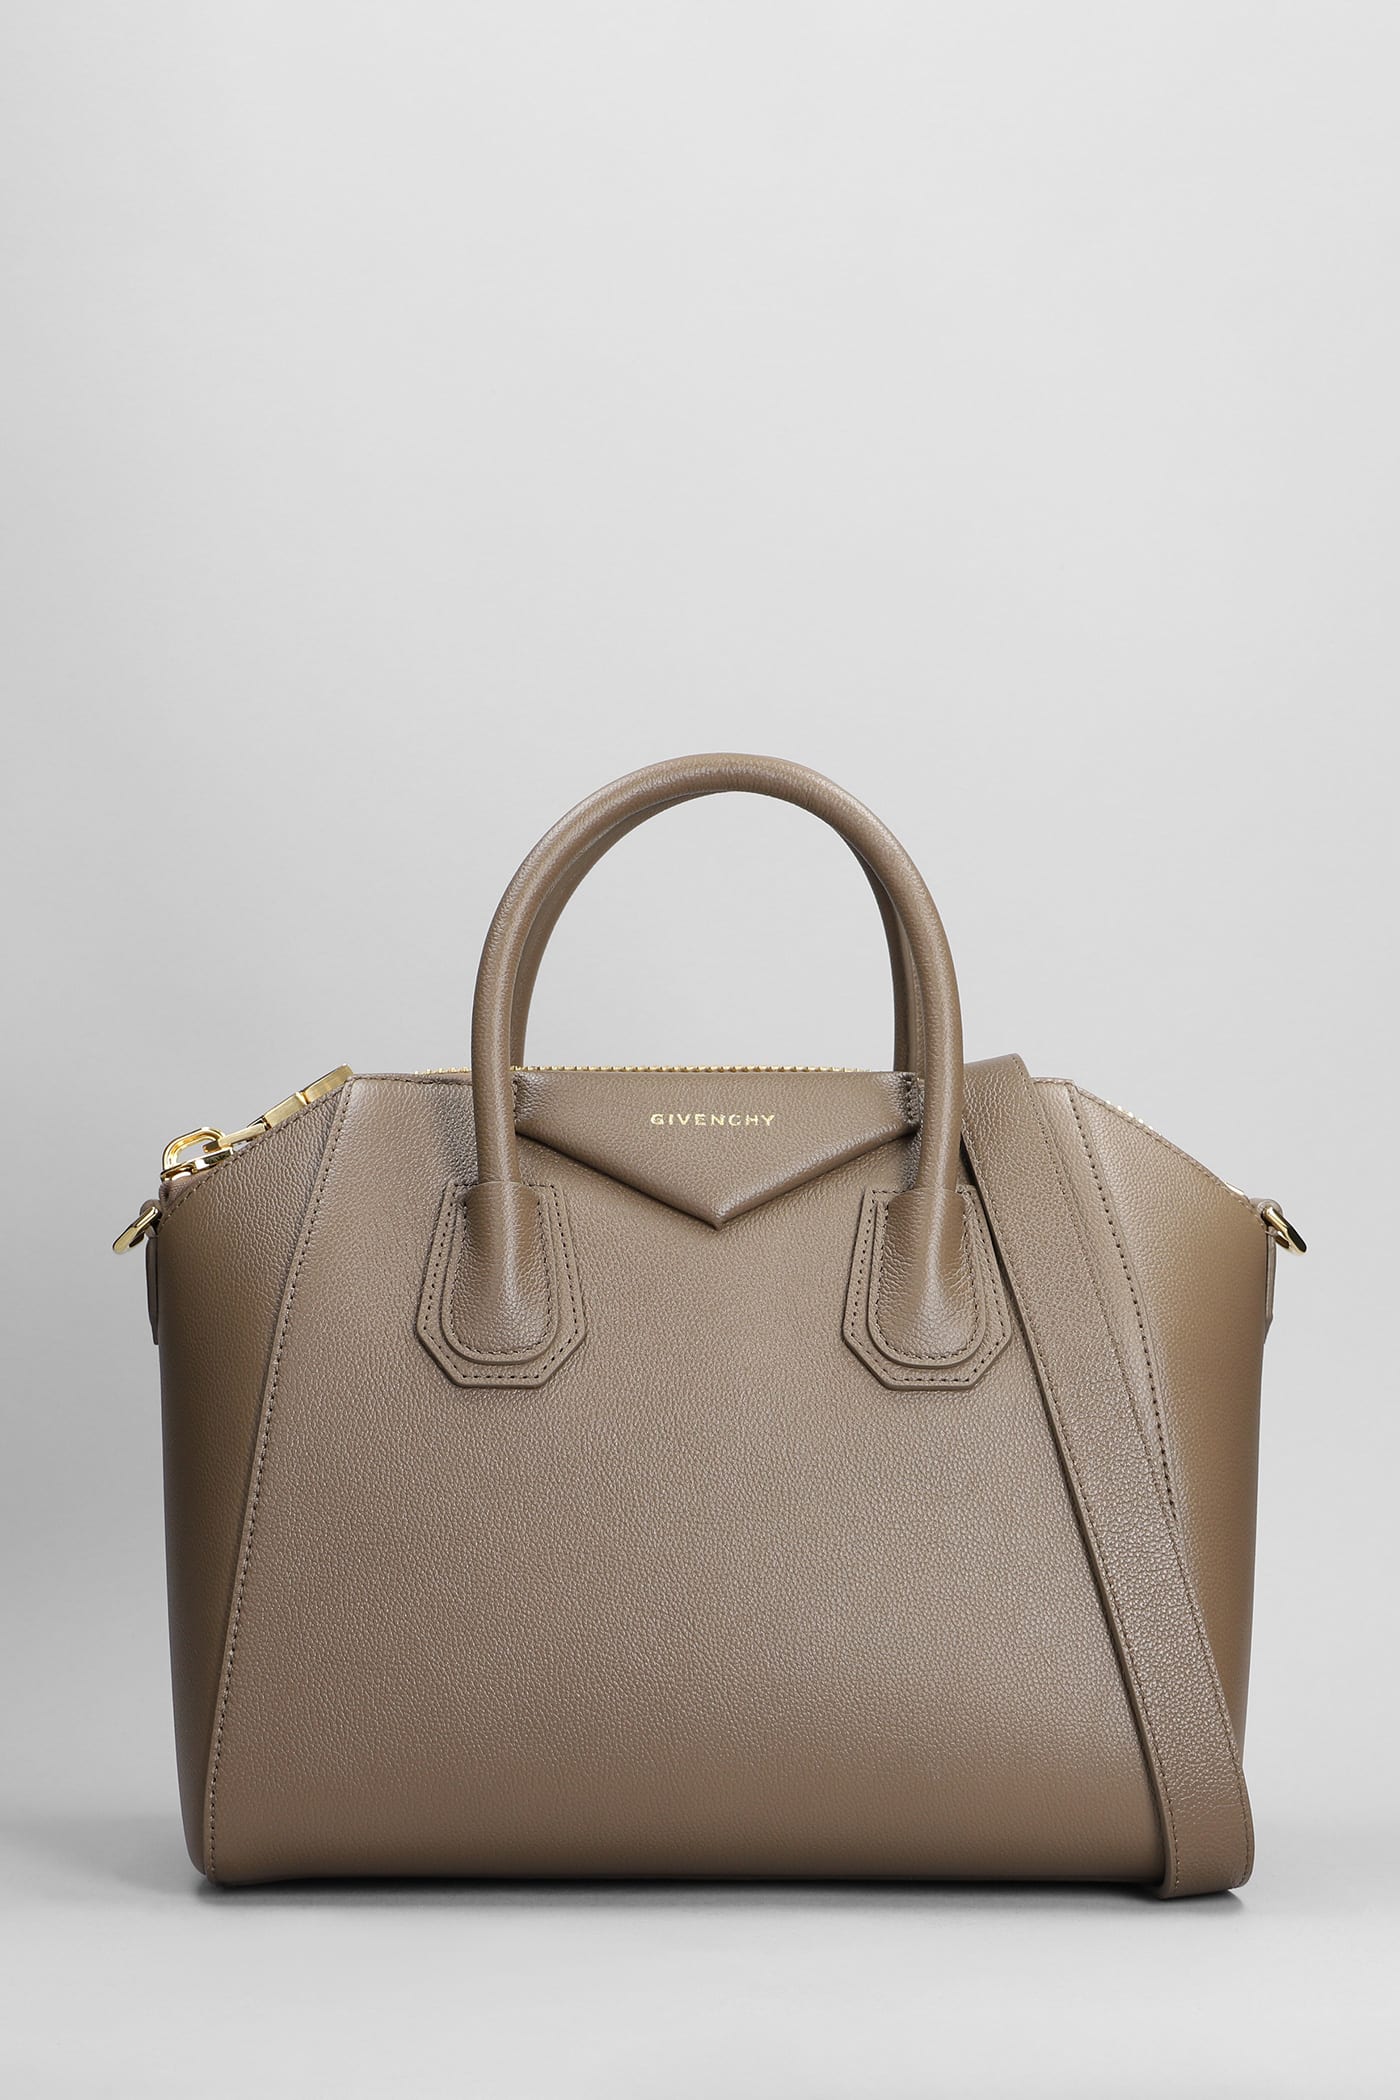 GIVENCHY ANTIGONA SMALL SHOULDER BAG IN TAUPE LEATHER